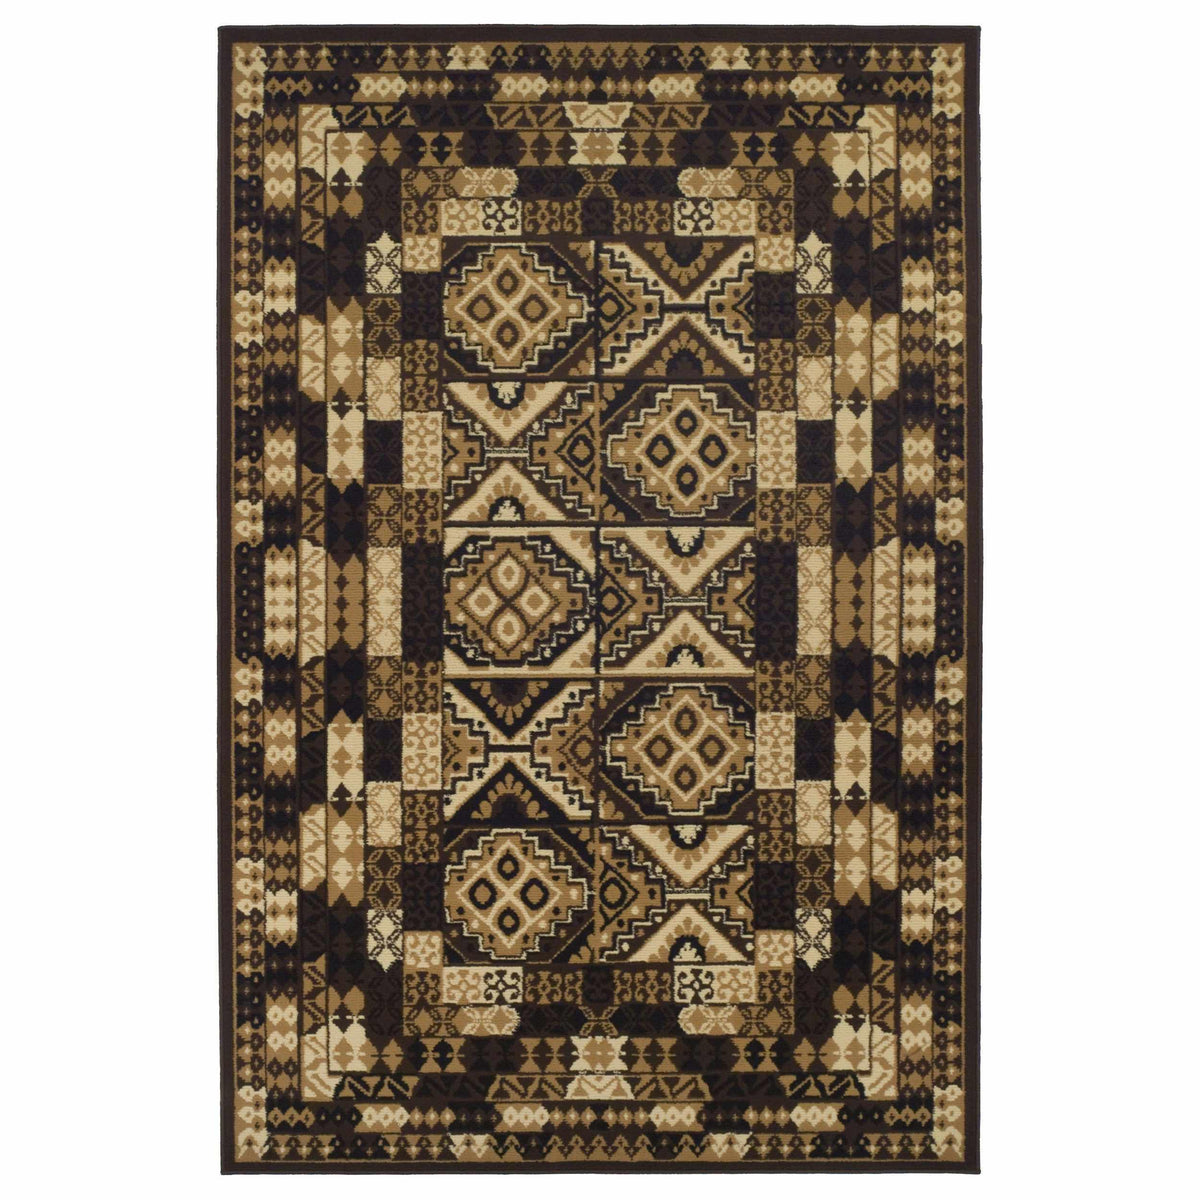 Contemporary Tribal Geometric Mosaic Area Rug-Rugs by Superior-Home City Inc